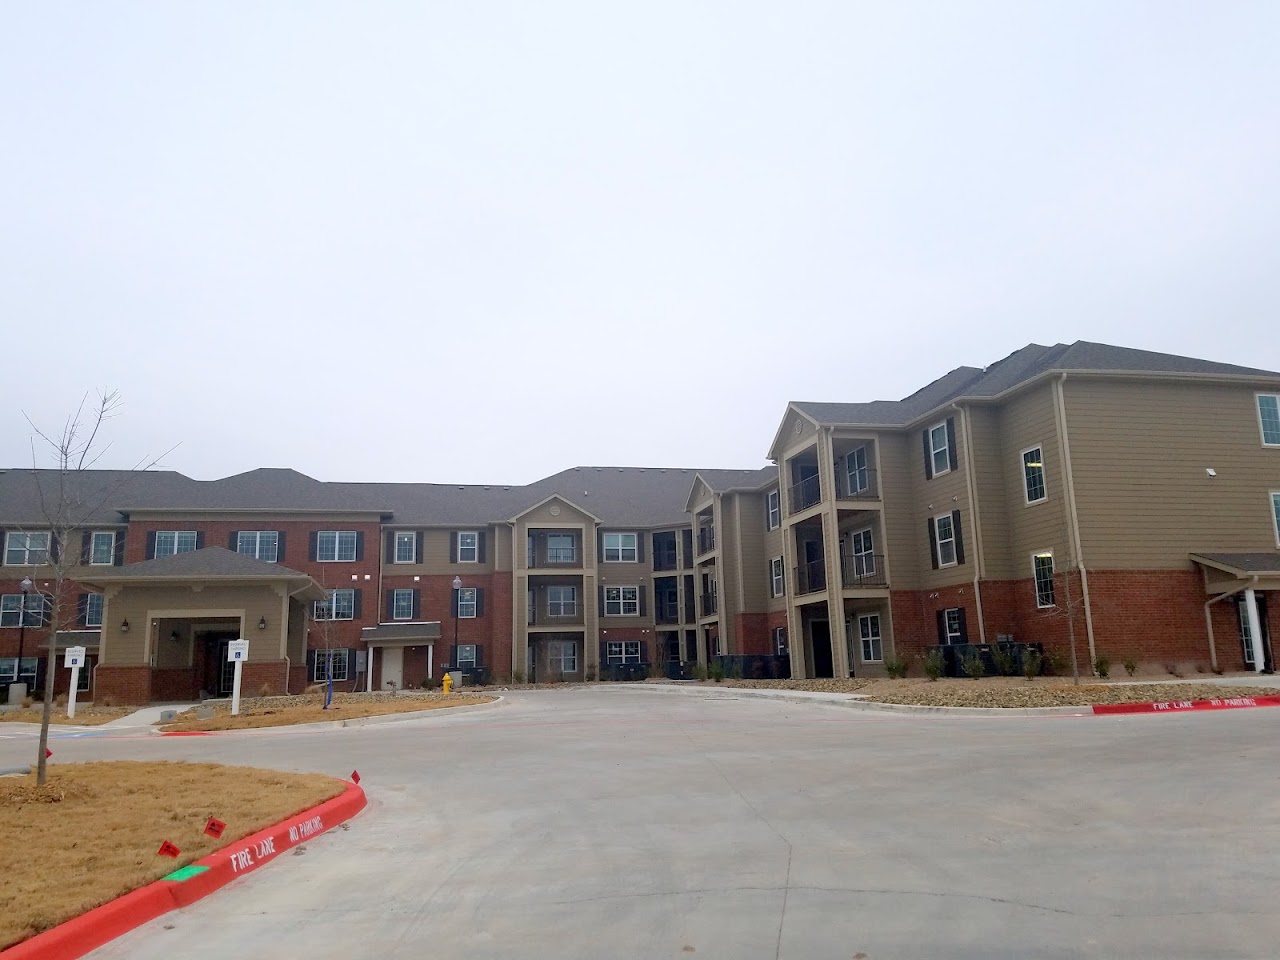 Photo of KIRBY PARK VILLAS. Affordable housing located at 609 WEST 29TH STREET SAN ANGELO, TX 76903